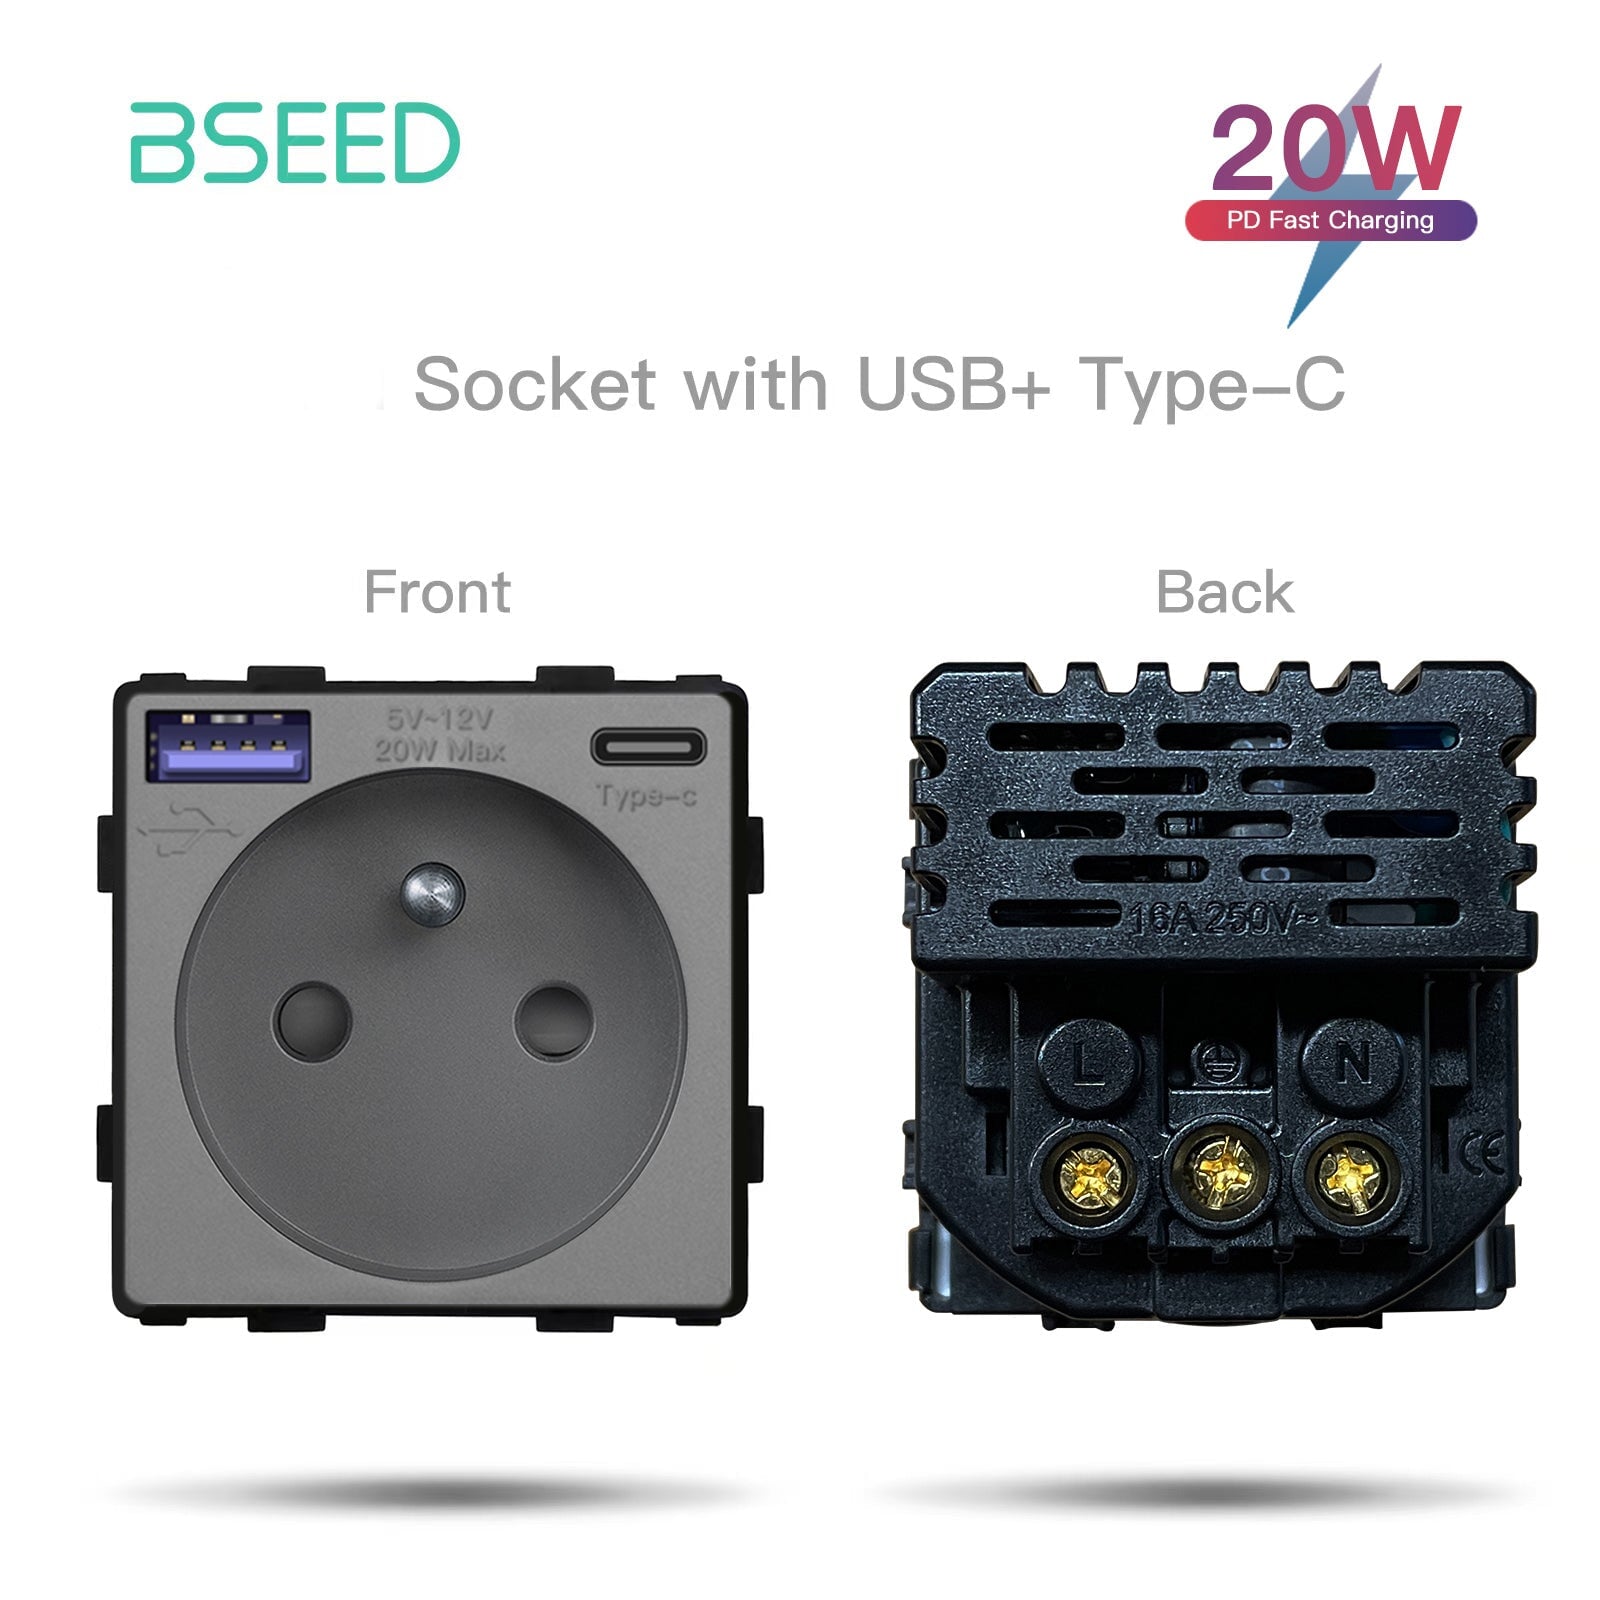 BSEED French Type-C Interface Outlet Wall Socket 16A USB Charge Power Outlets & Sockets Bseedswitch Grey 20W 